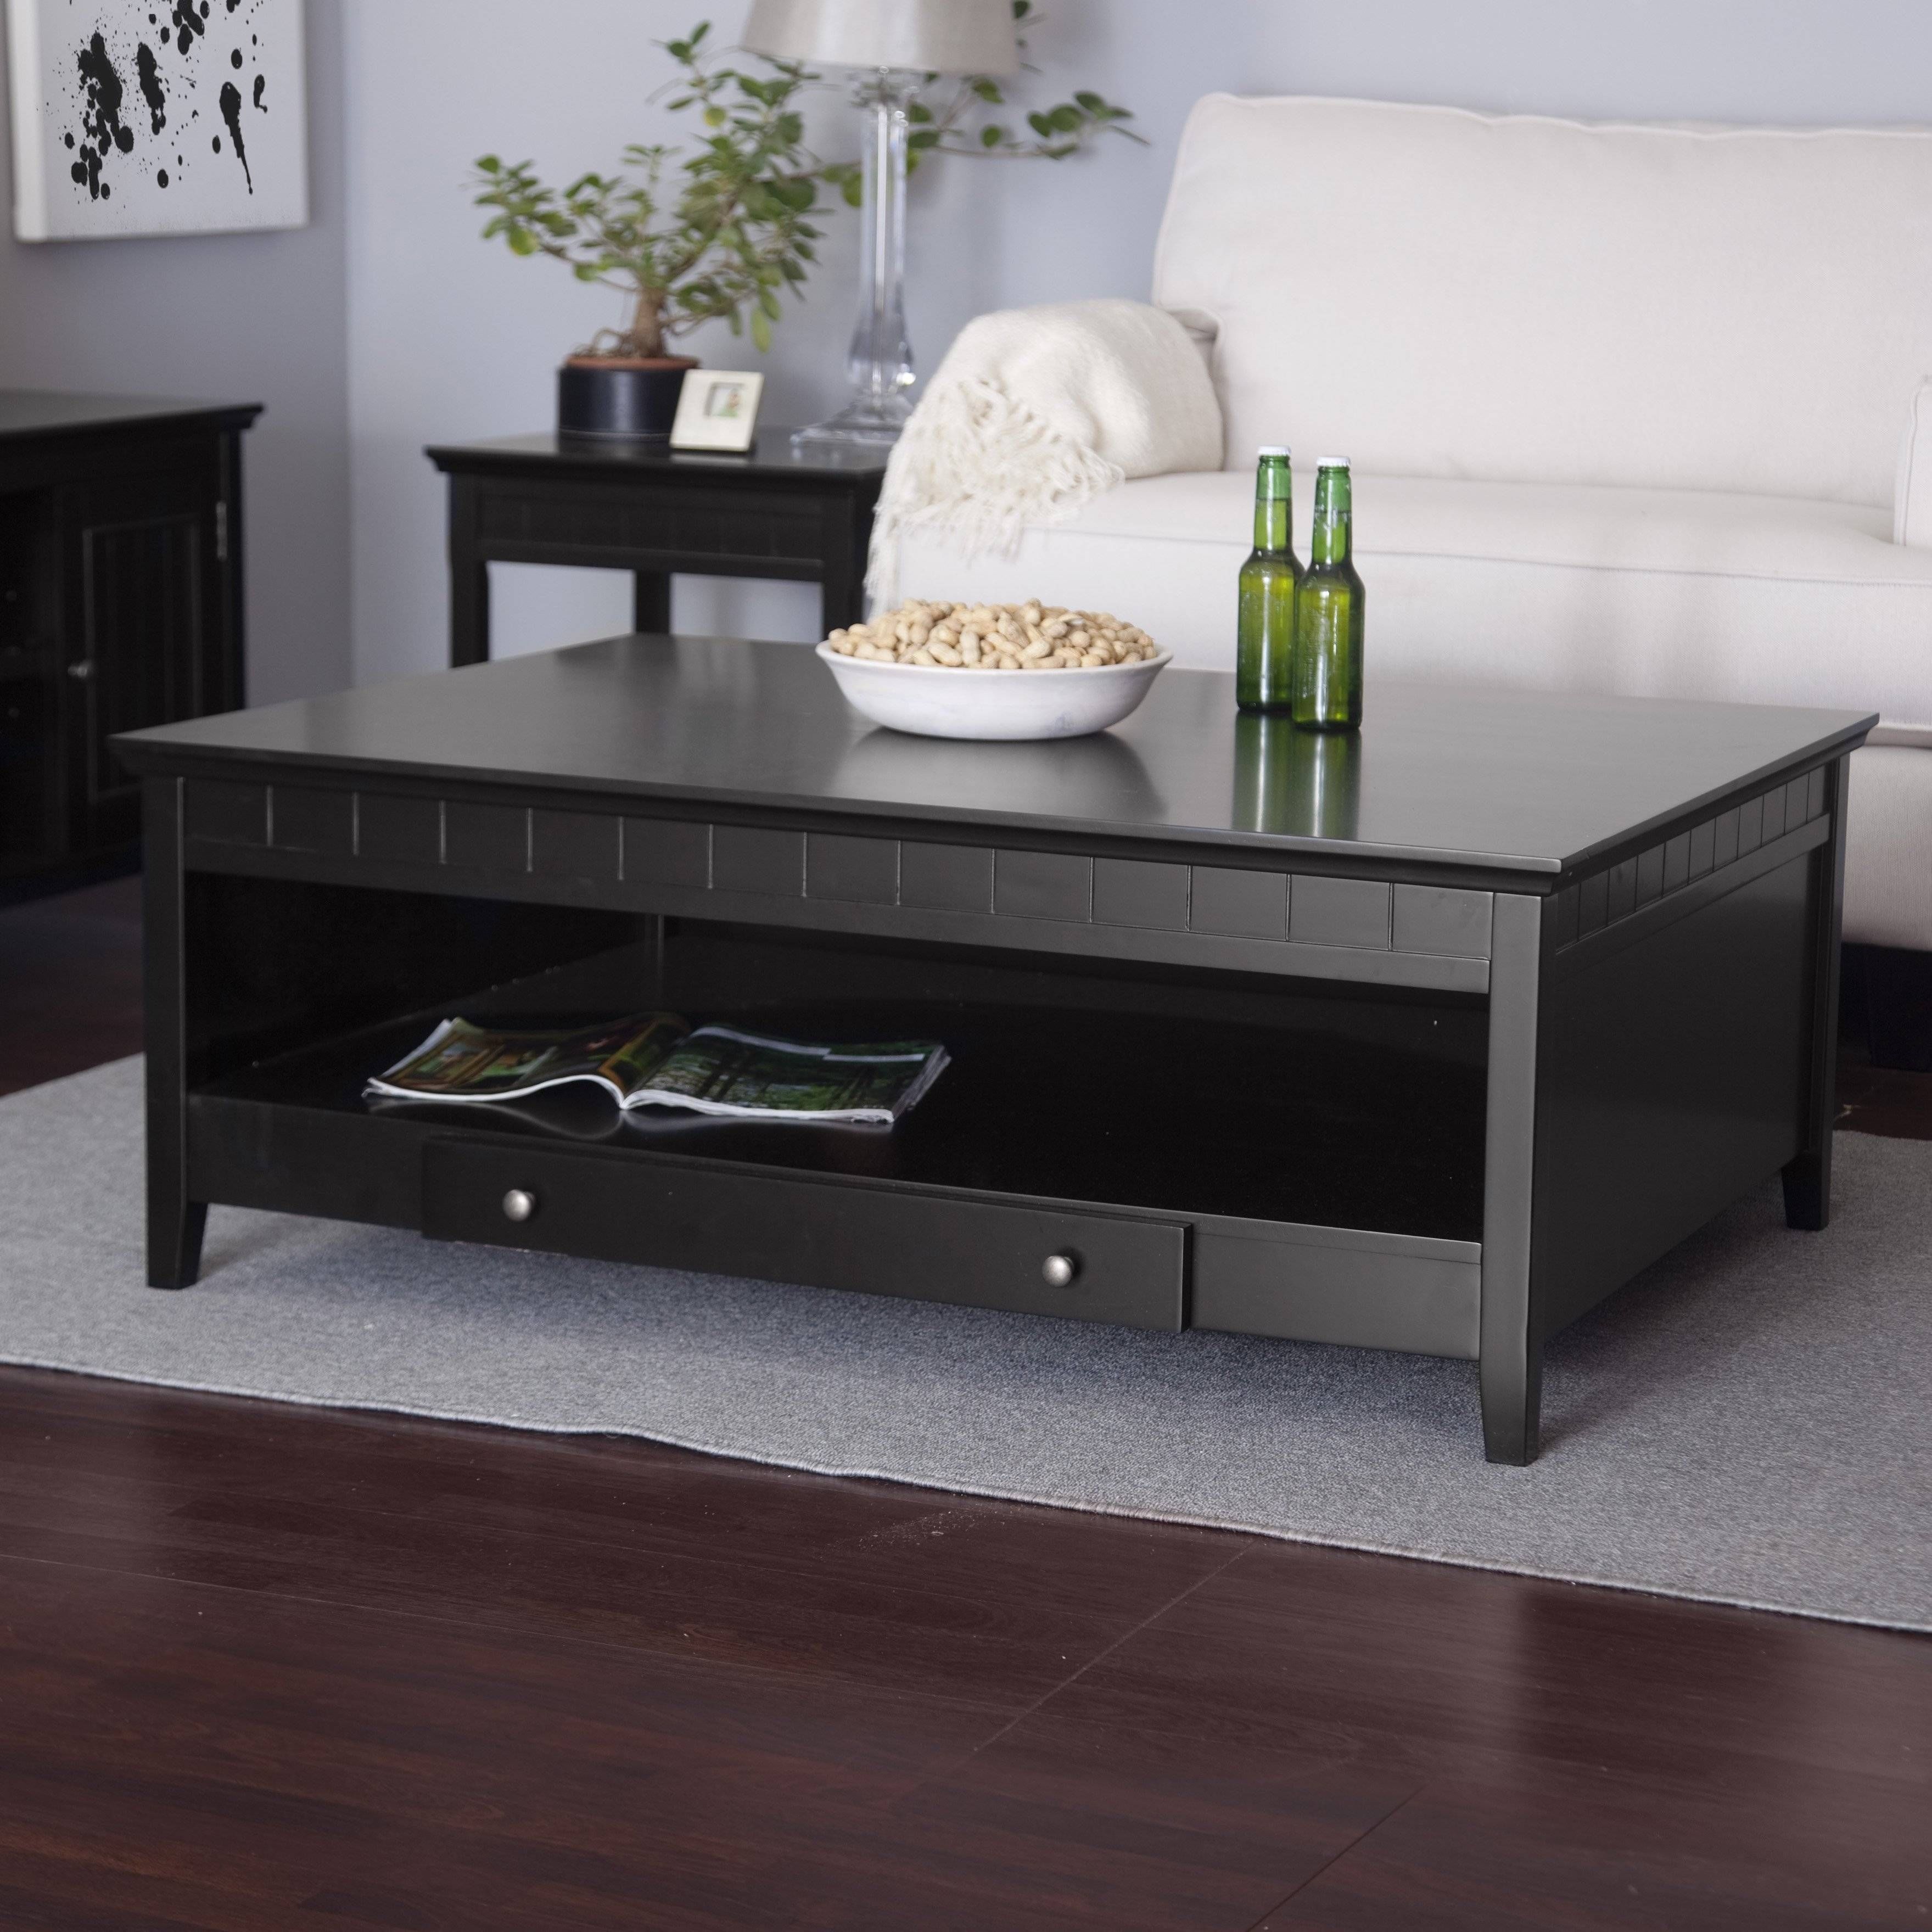 Coffee Tables: New Small Coffee Tables With Storage Design Ideas Within Small Coffee Tables With Storage (Photo 7 of 30)